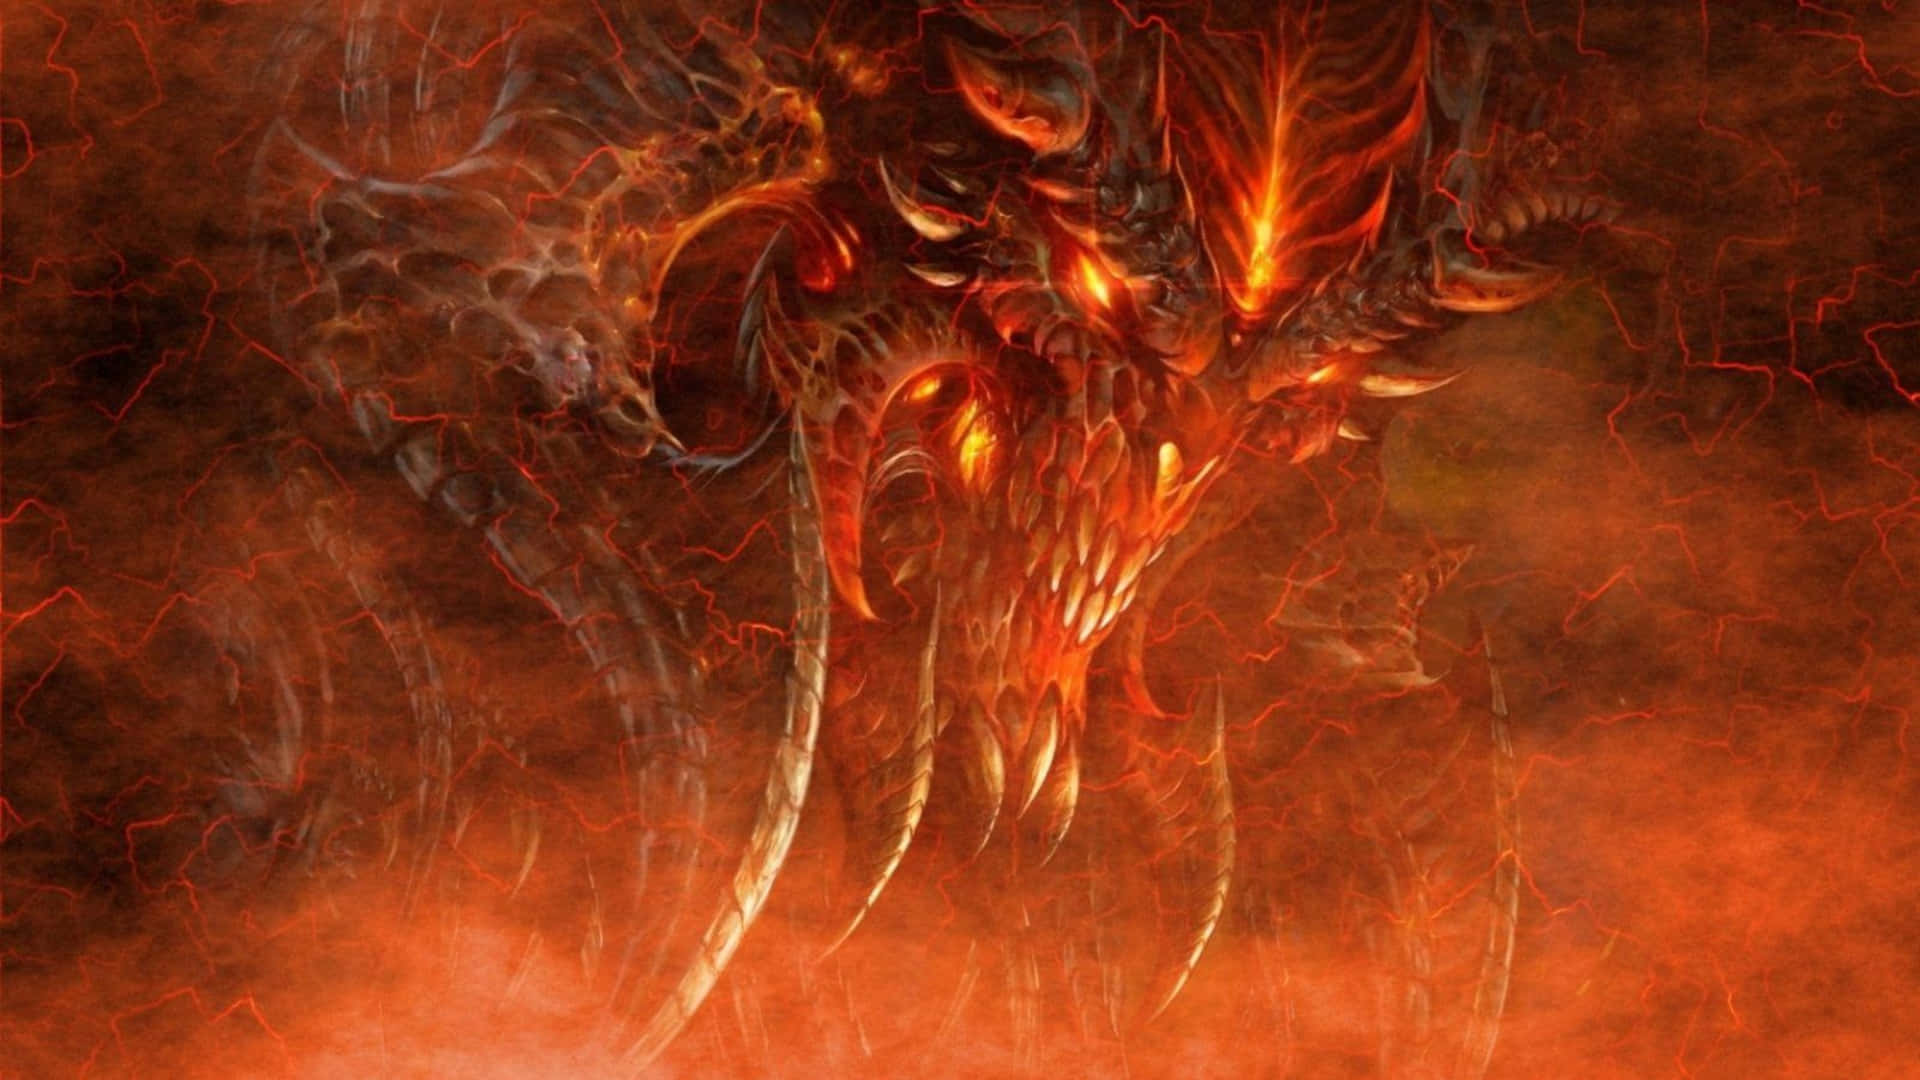 A Demon With A Fiery Head In The Background Wallpaper